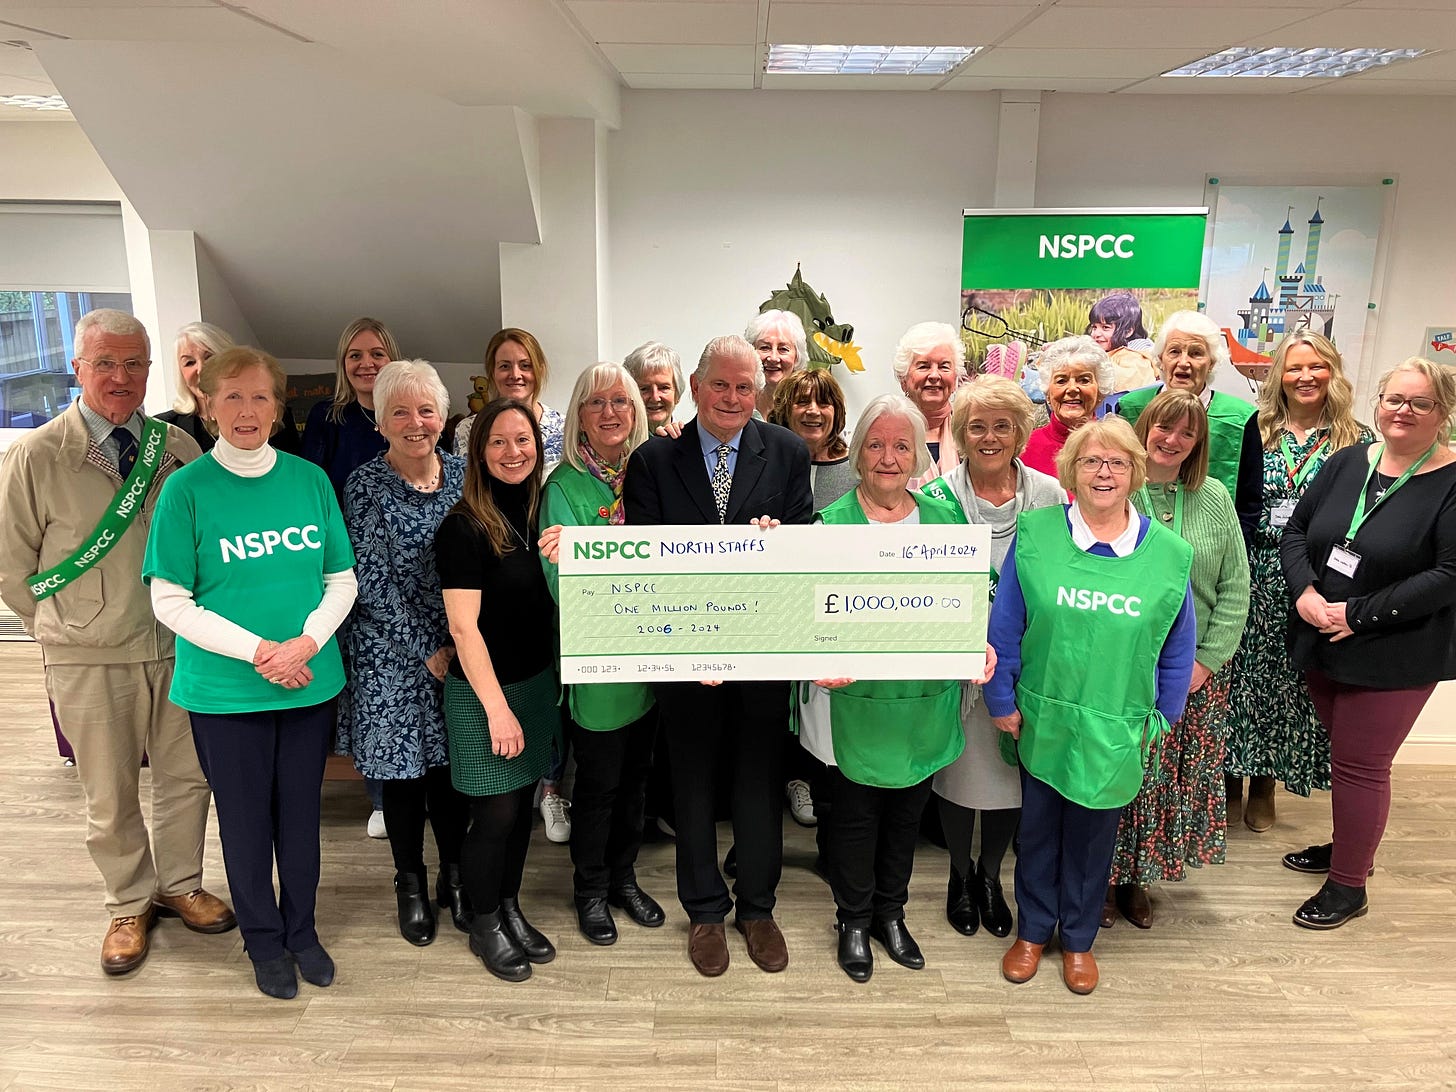 NSPCC volunteers from North Staffordshire, together they have raised £1 million for the charity since 2006. The celebration event took place in Stoke-on-Trent at the NSPCC’s Together for Childhood Centre.